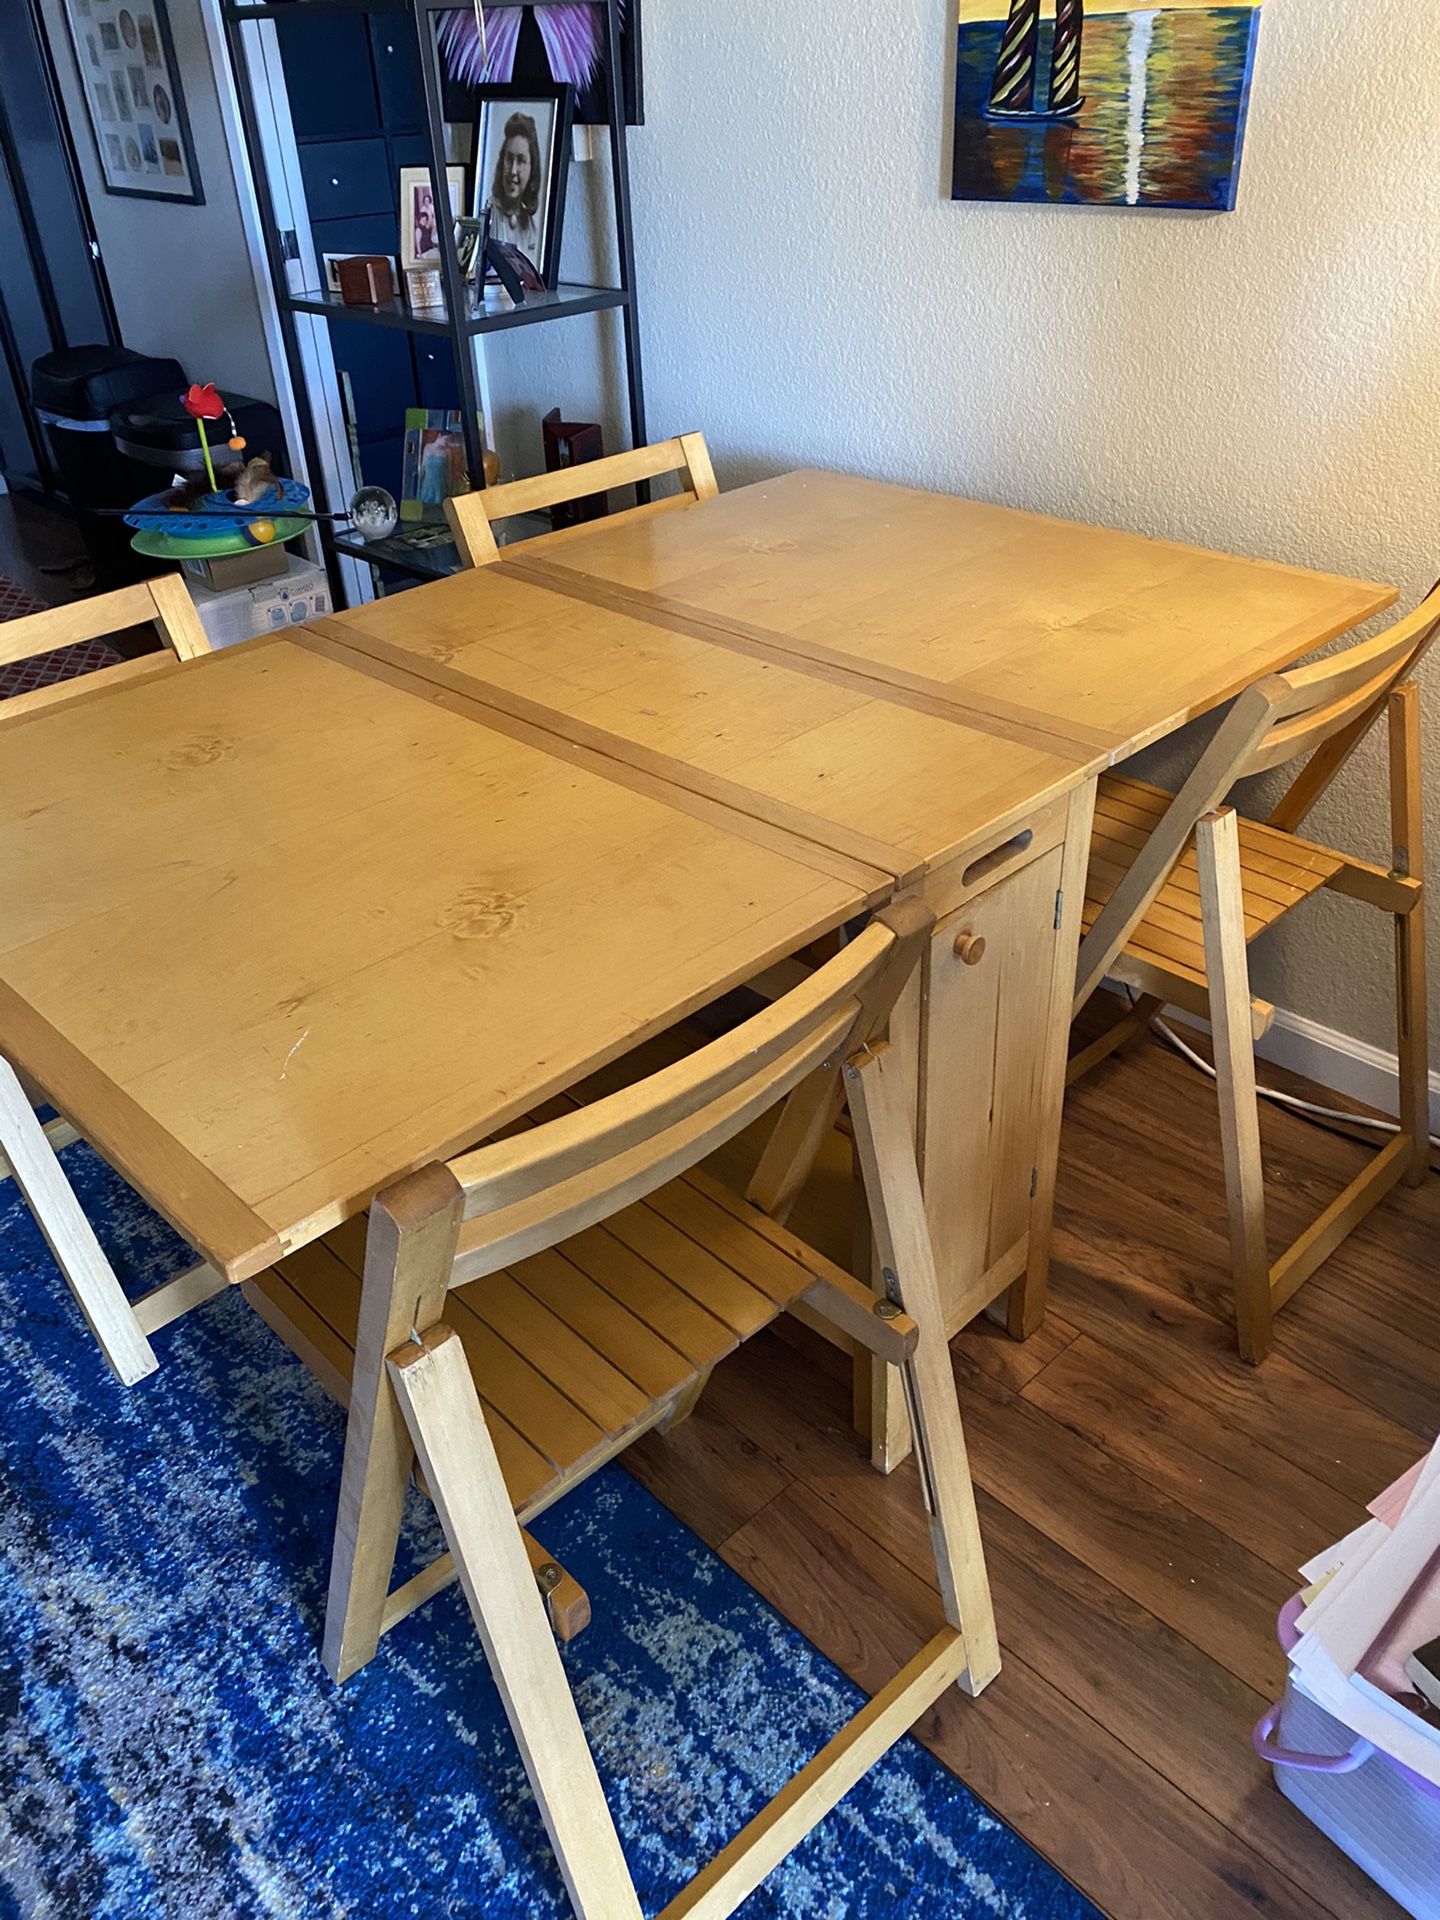 IKEA stowaway dining table 4 chairs. Can seat six